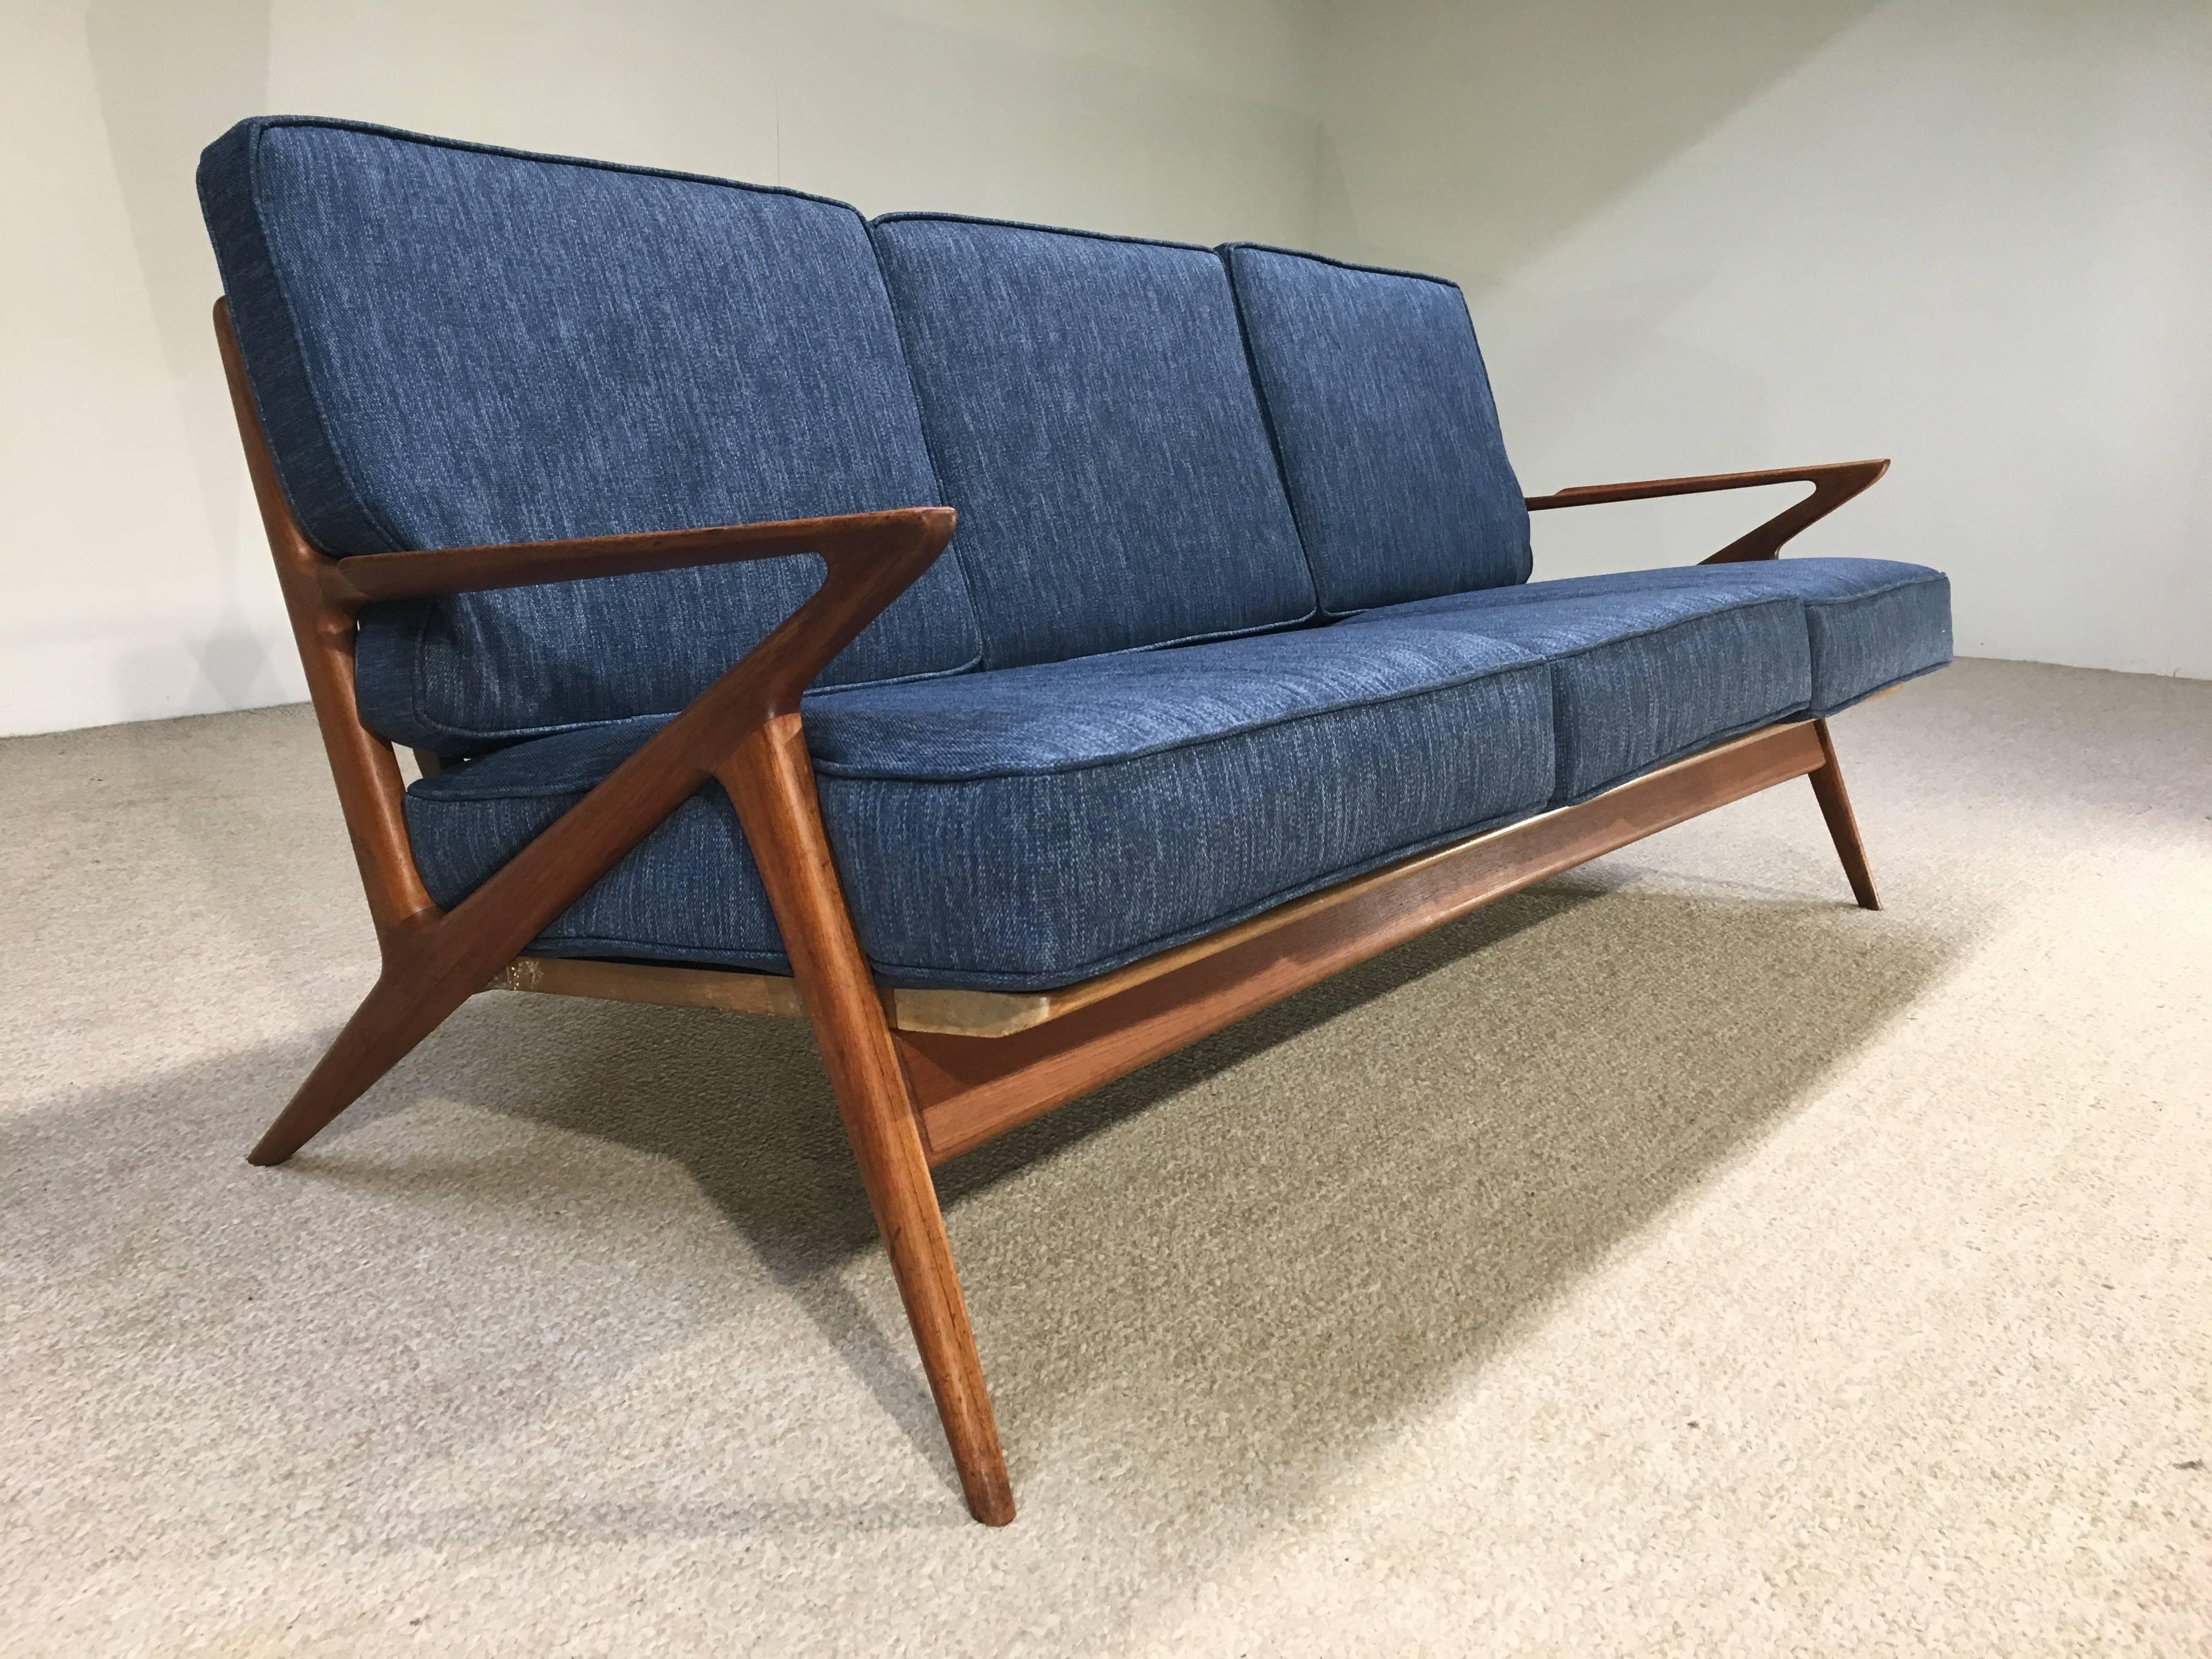 The "Z" sofa in teak by Poul Jensen for Selig, Denmark. Beautiful, stunning lines adorn one of Jensen's greatest design accomplishments.
New Fagas straps from Norway, new cushions and upholstery and beautifully maintained teak frame. This